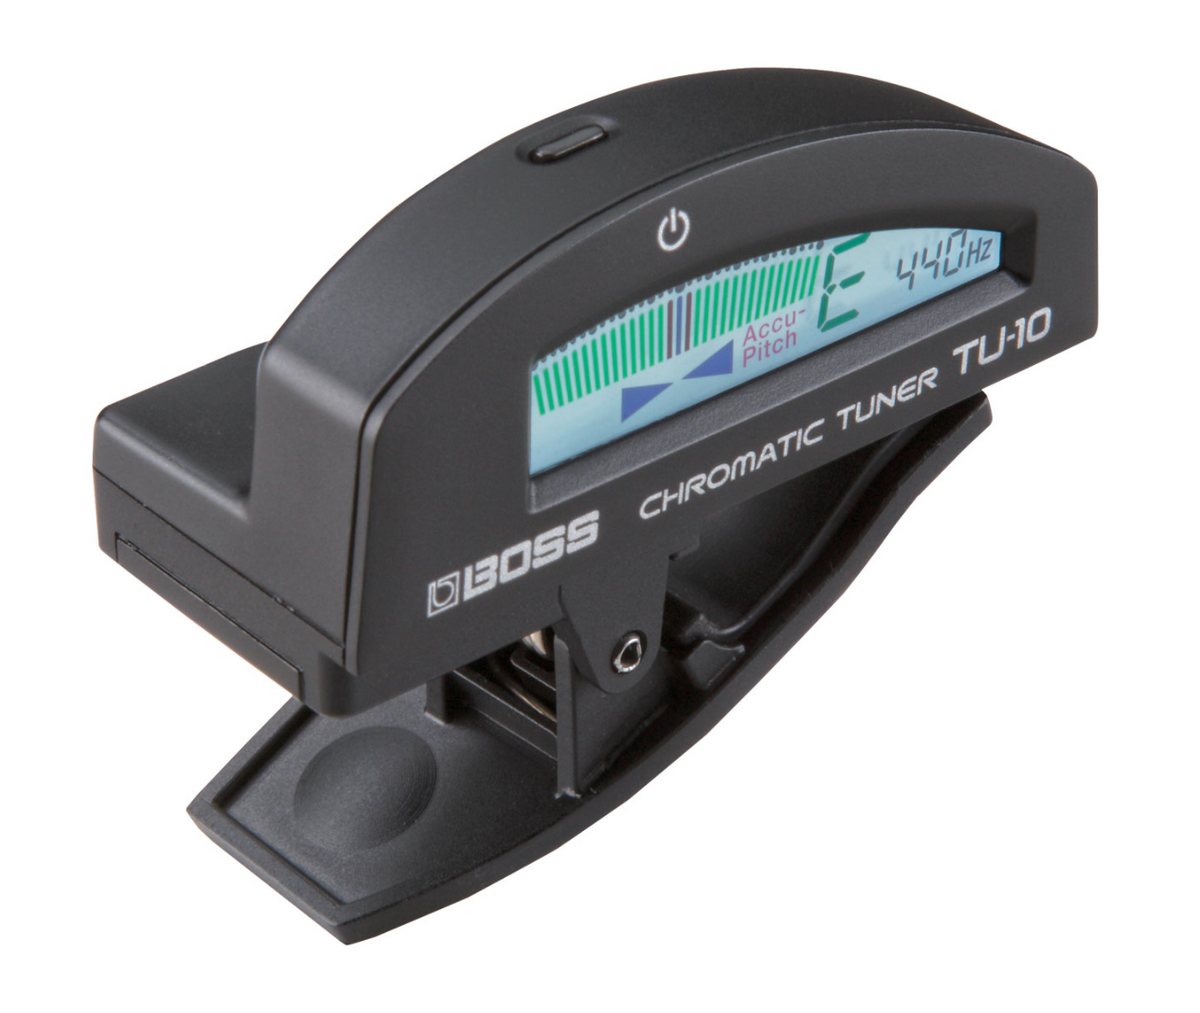 BOSS TU-10 Clip-On Chromatic Tuner Black Best Guitar Tuner with Accu-Pitch Function, Flat Tuning up to 5 Semitones, and Stream Mode